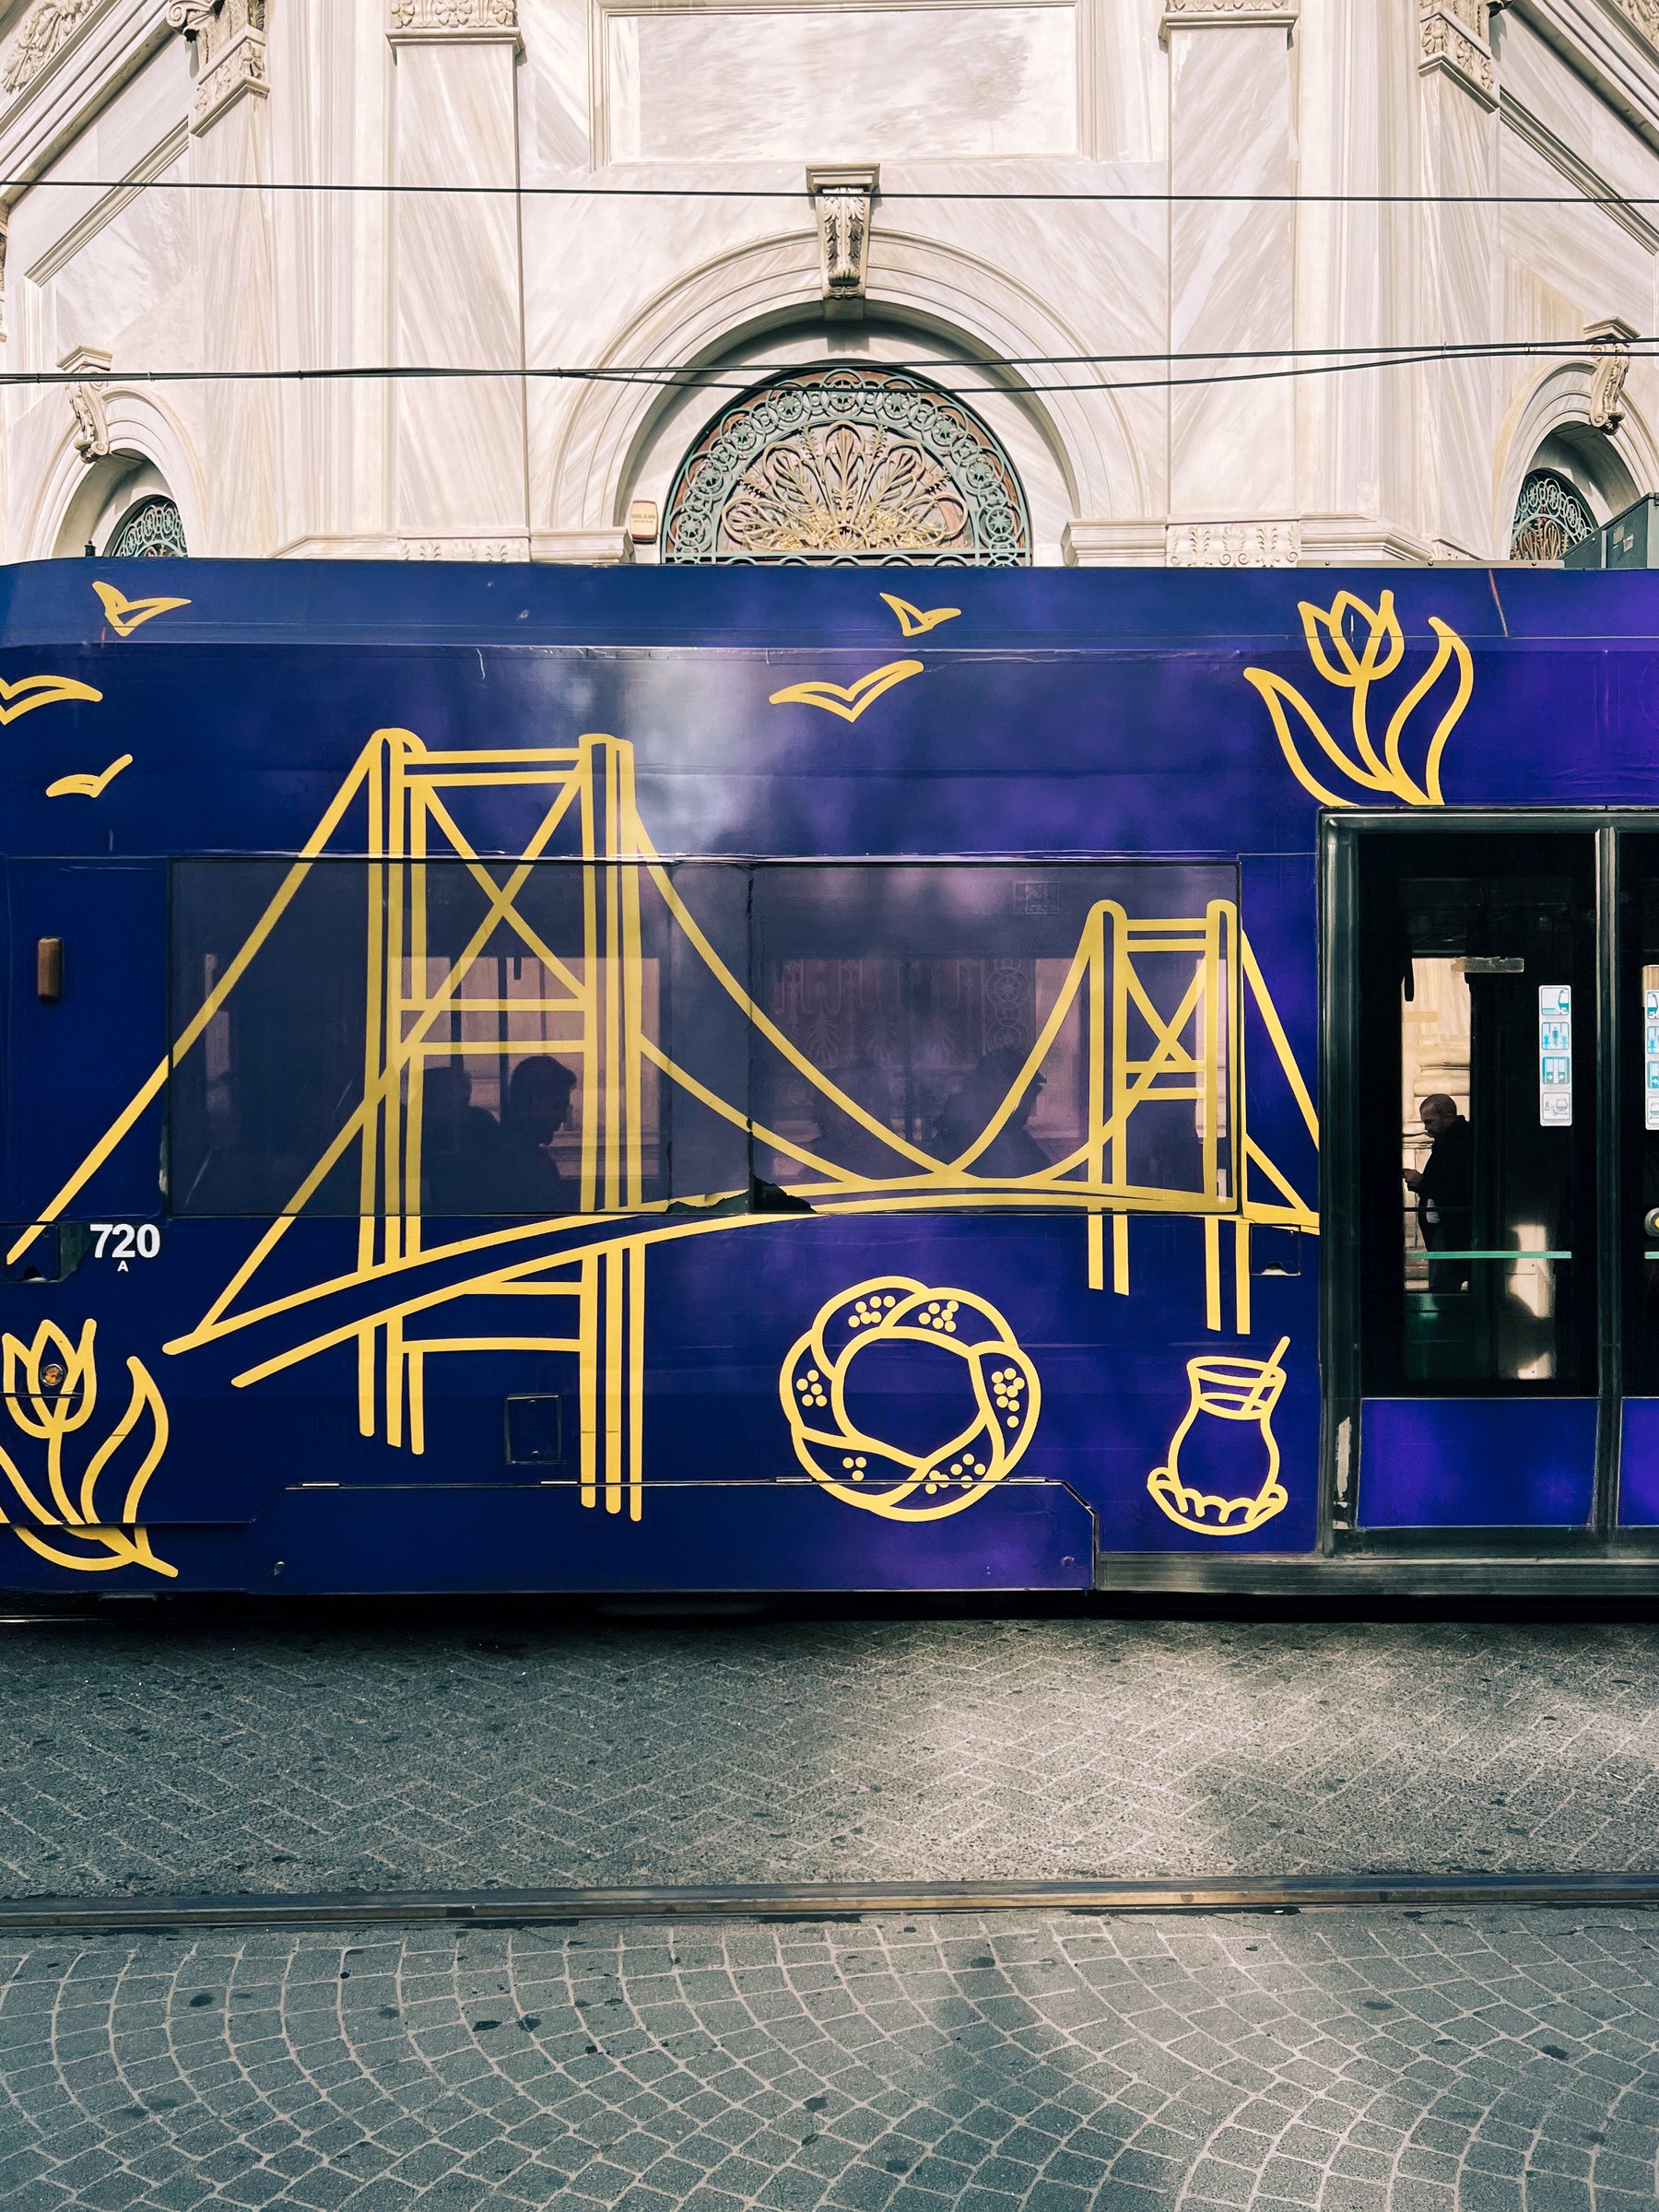 A blue streetcar with decorative yellow line graphics, including a bridge and traditional symbols like a pretzel and pitcher, parked in front of a building with detailed stonework and an ornate window.